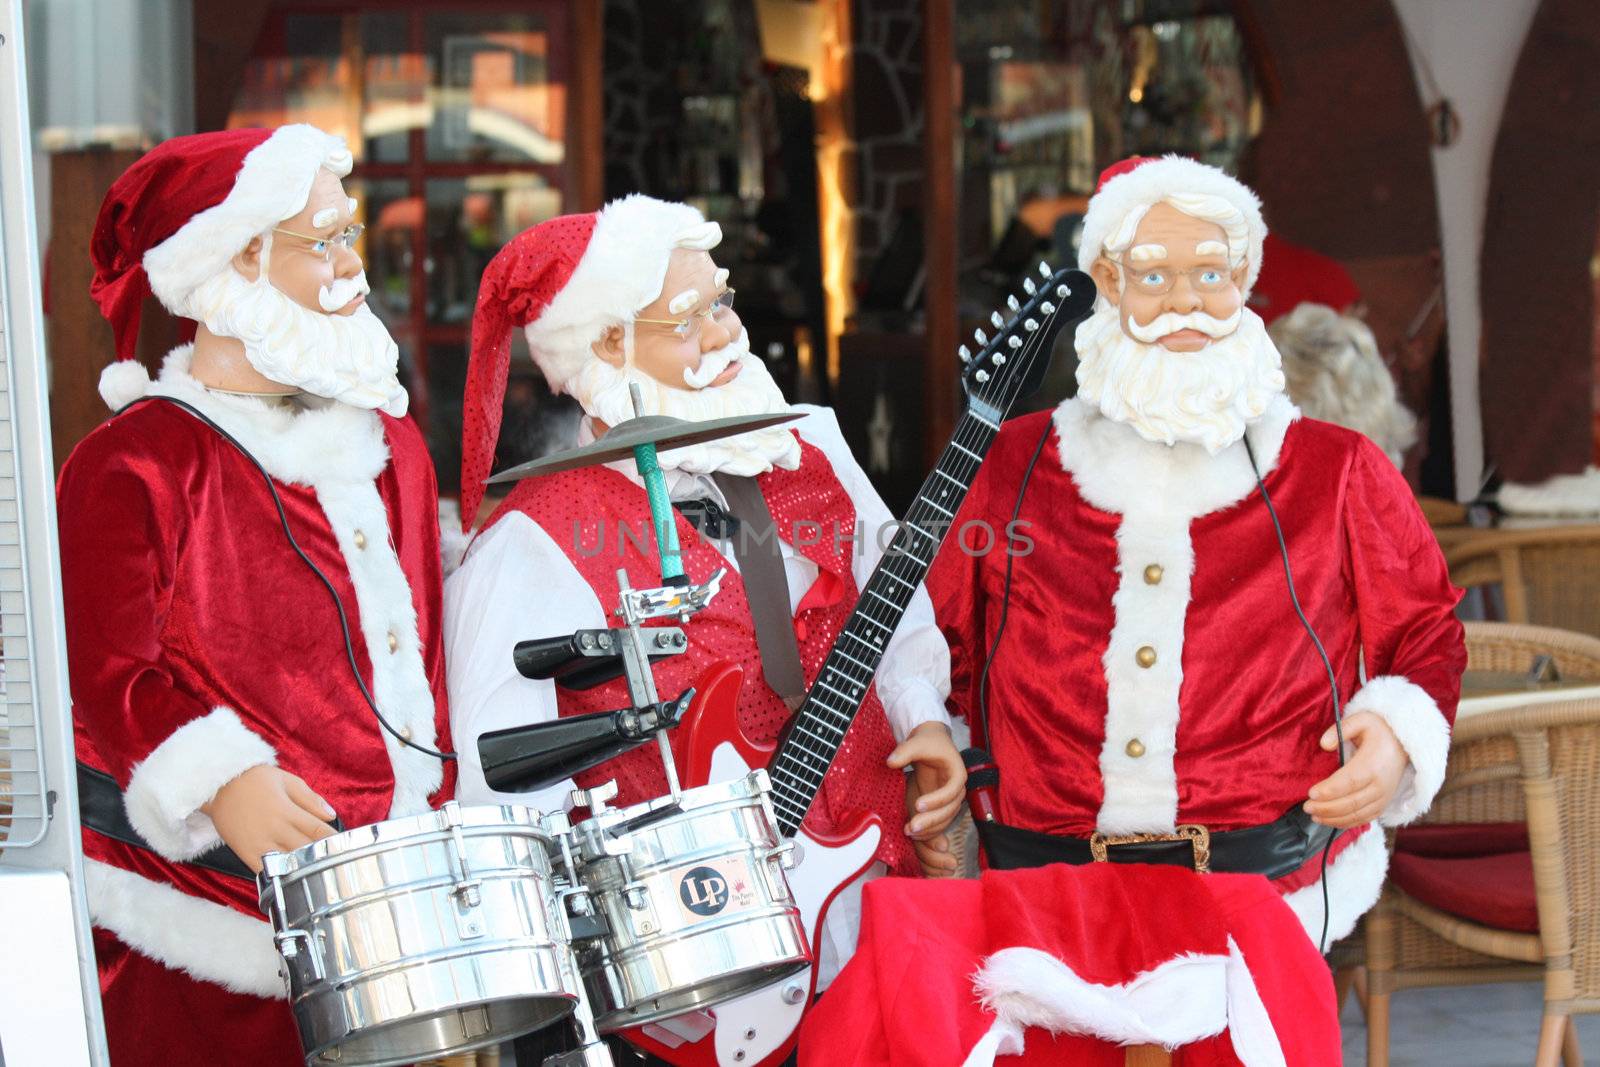 Santa Claus and friends performing as a rock band